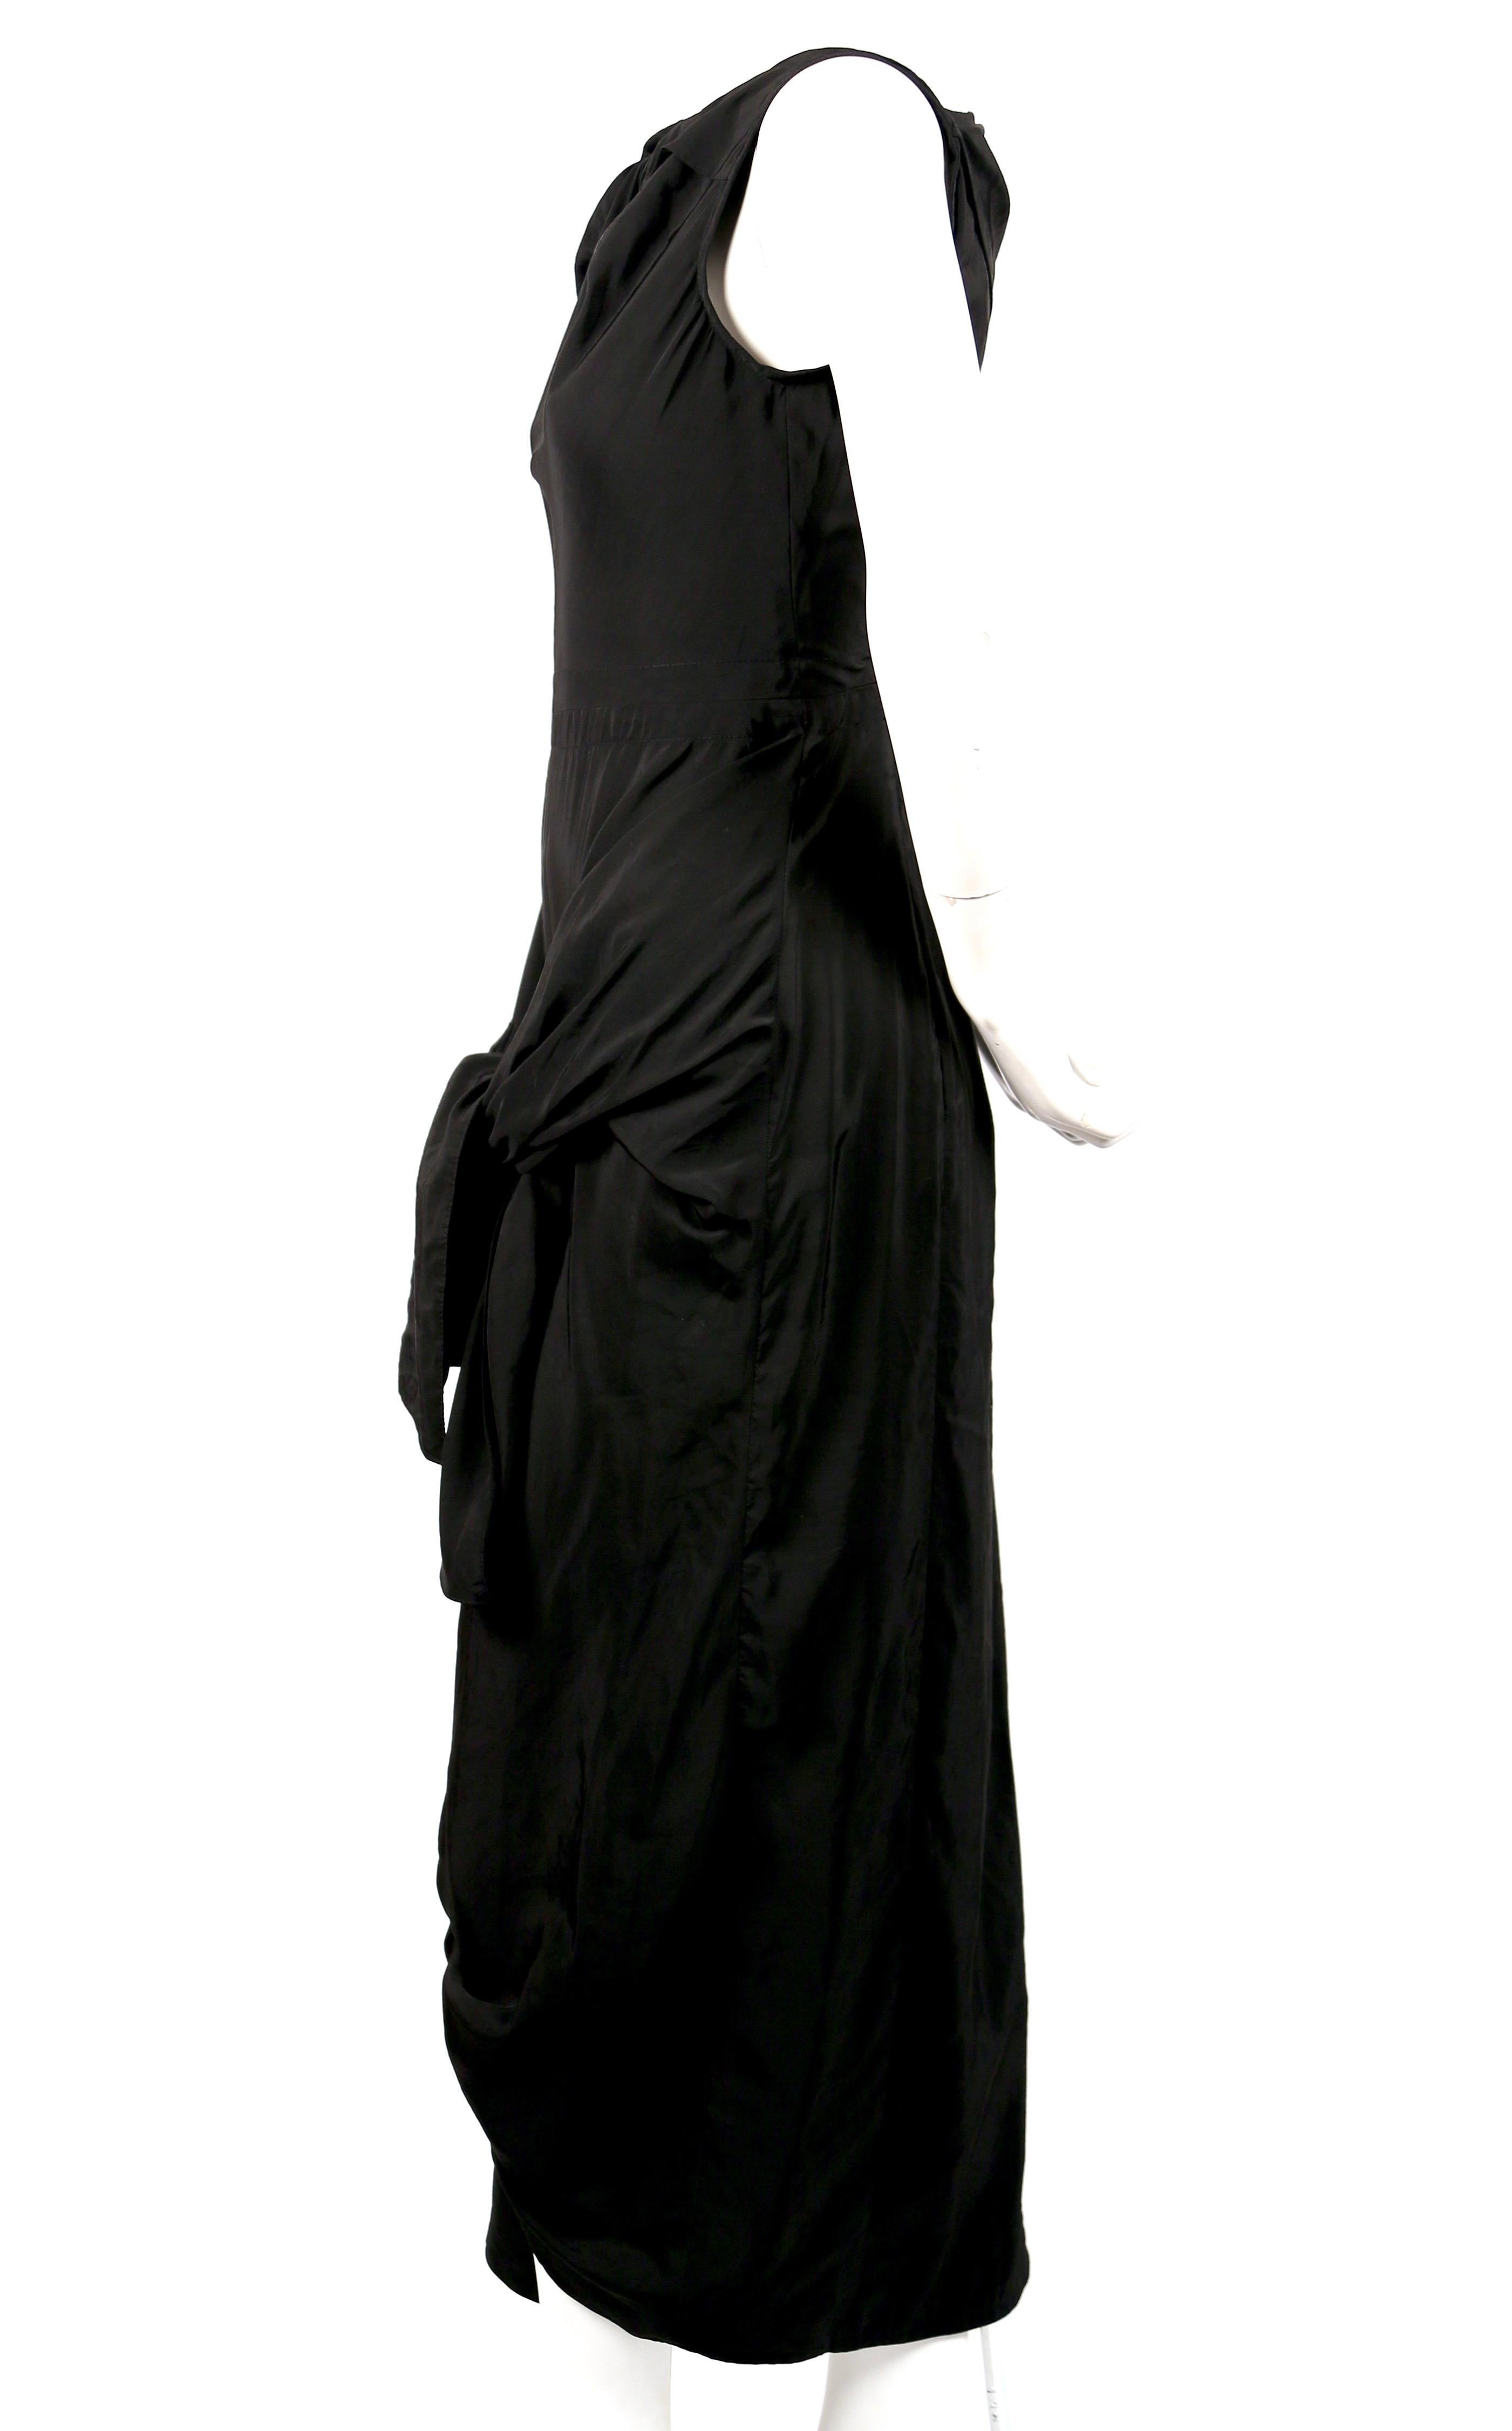 Jet black dress with twisted neckline, ties at hips and cut out at back designed by Phoebe Philo for Celine. French size 34. Approximate measurements: shoulder 13